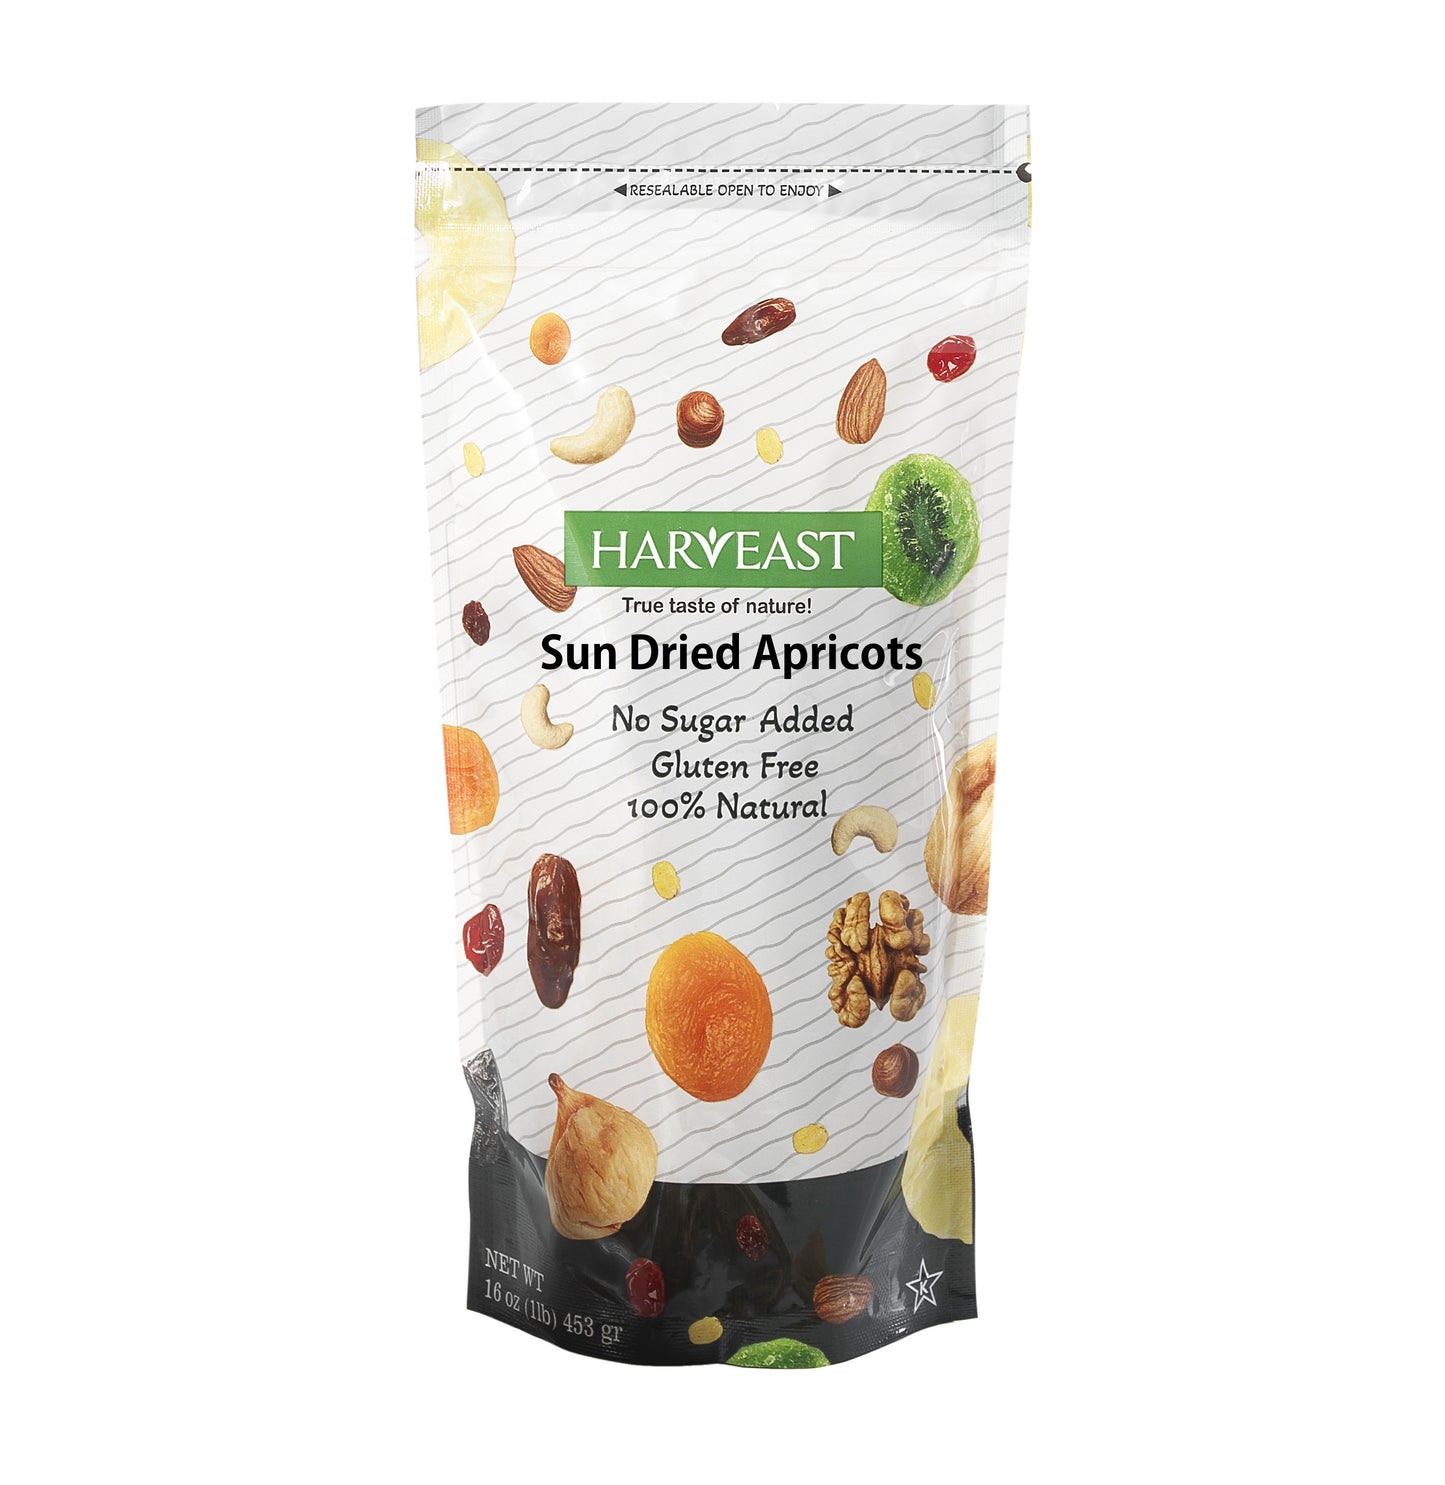 HARVEAST Sun Dried Apricots - Turkish Gourmet Dehydrated Apricots, No Sugar Added, Gluten Free, Kosher, Vegan – Sweet & Fresh Dried Apricots Healthy Snack in Resalable Bag, 1 Lb